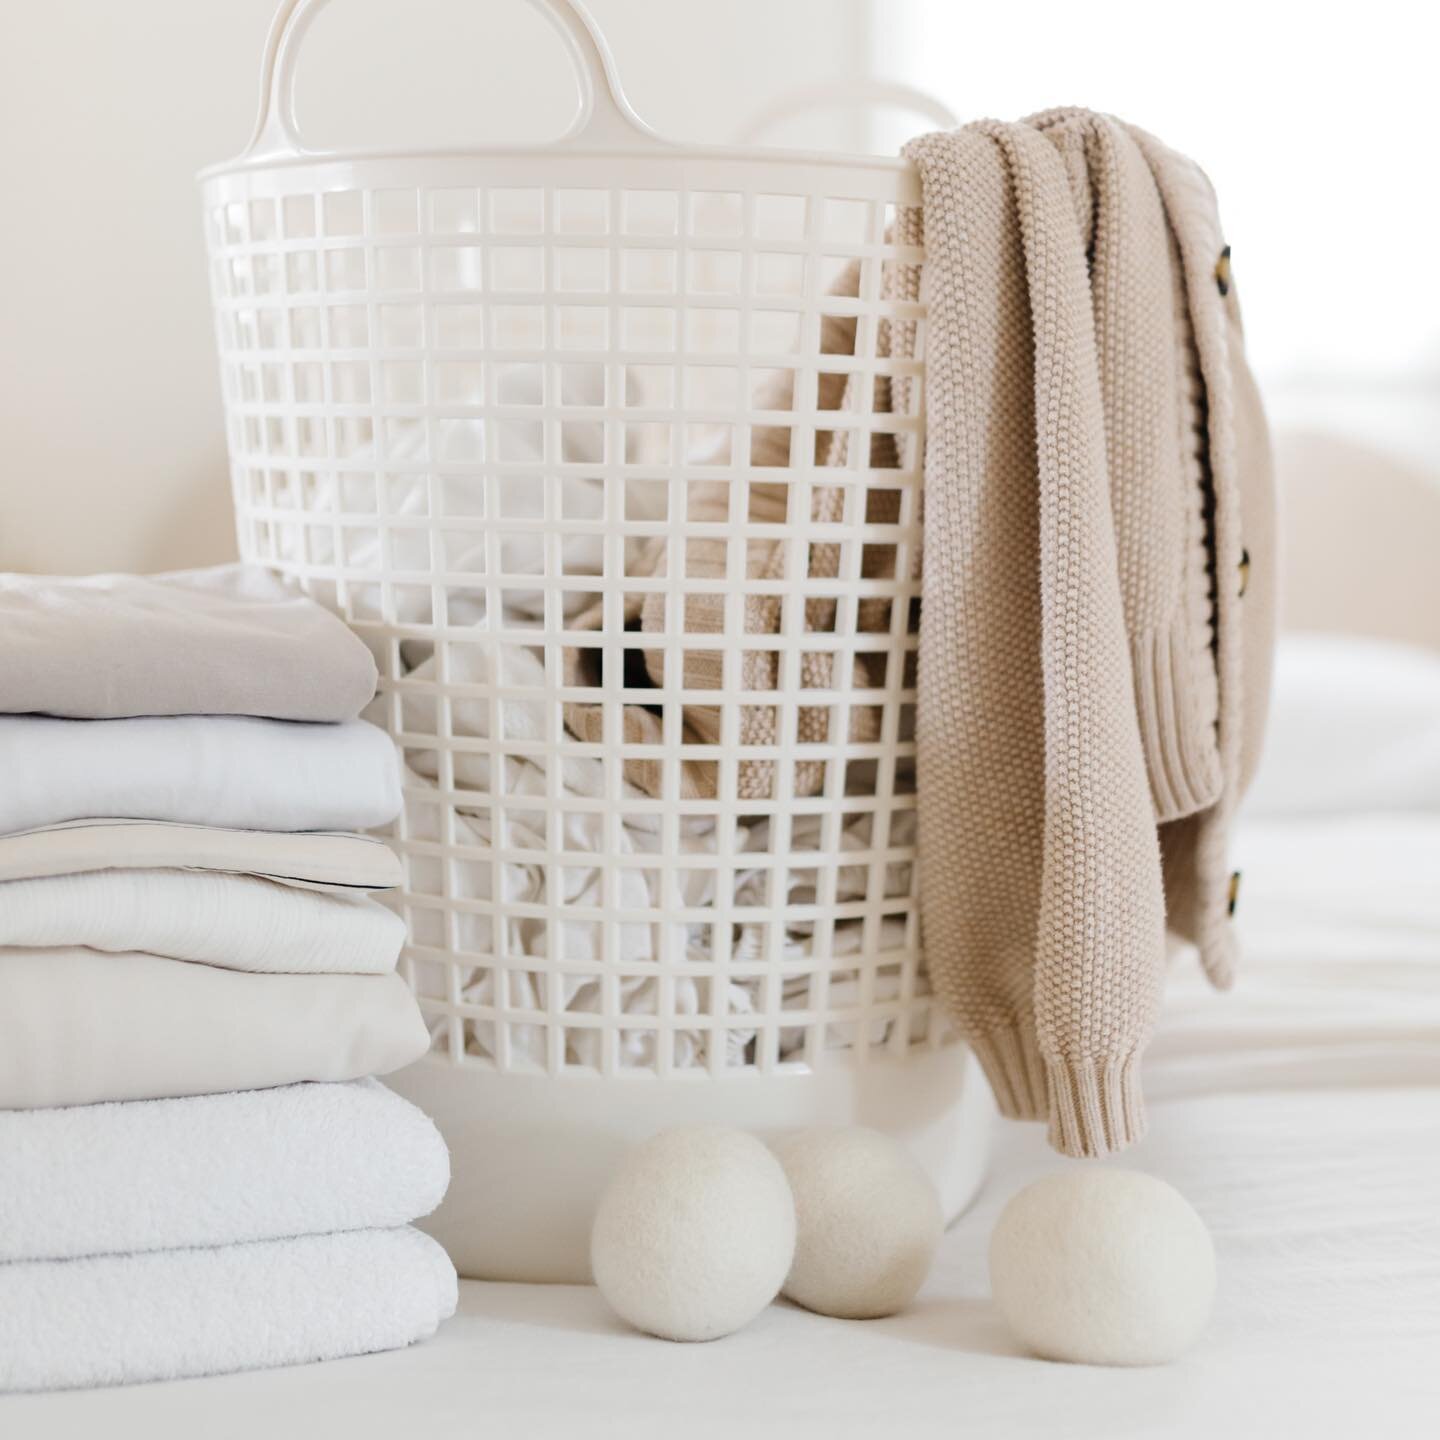 This sounds  counterintuitive, but a good deep clean of your home before your move  date is a great way to further refine your belongings and ensure your  move is seamless. A good spring clean will unearth extra items in  cabinets and drawers you did